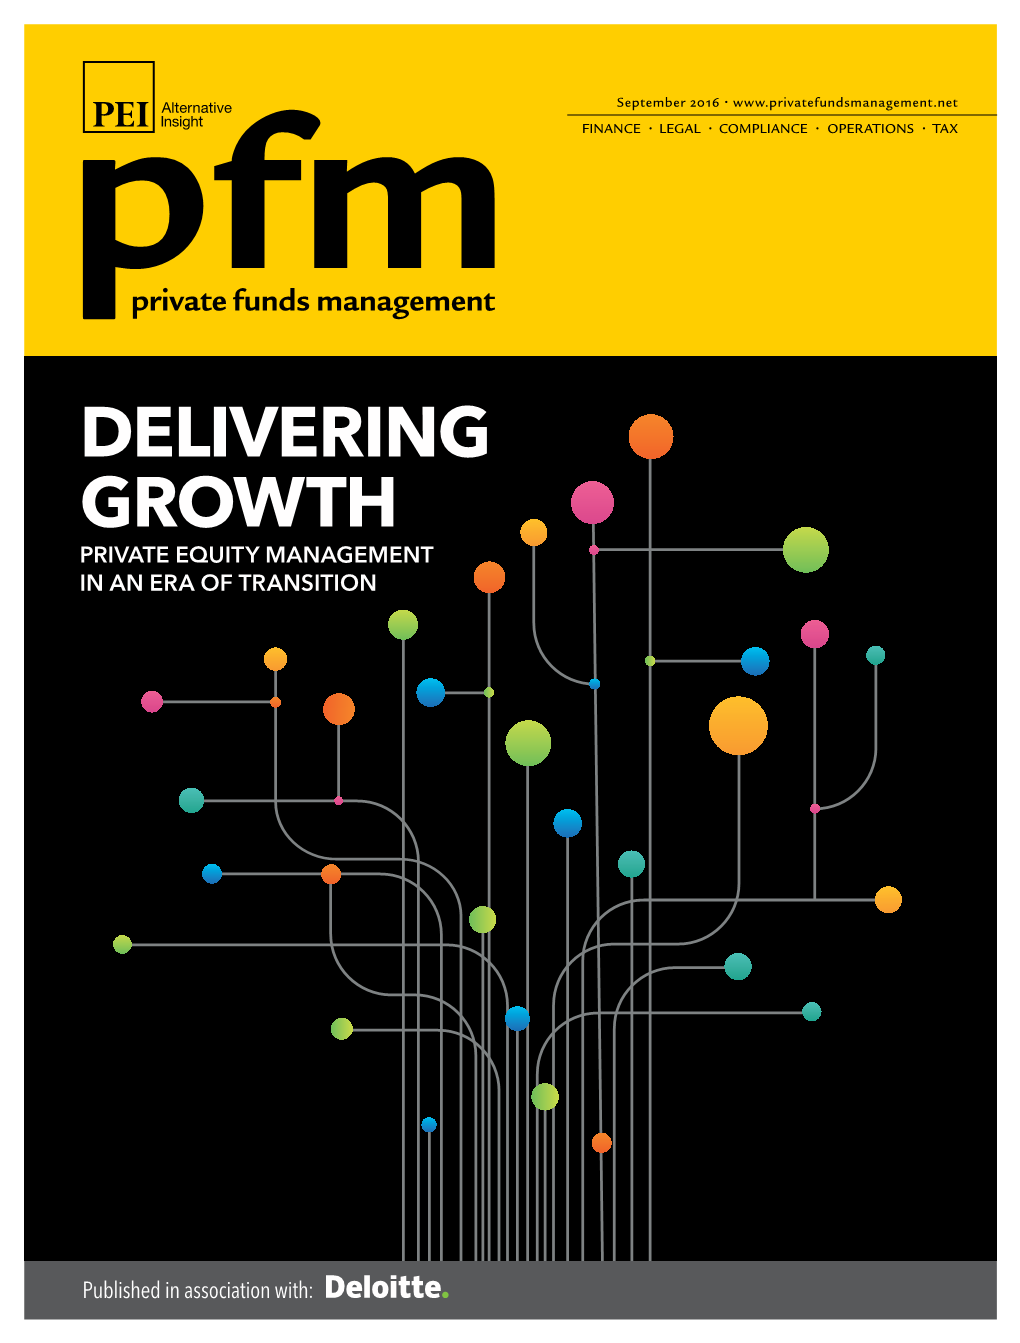 Delivering Growth Private Equity Management in an Era of Transition